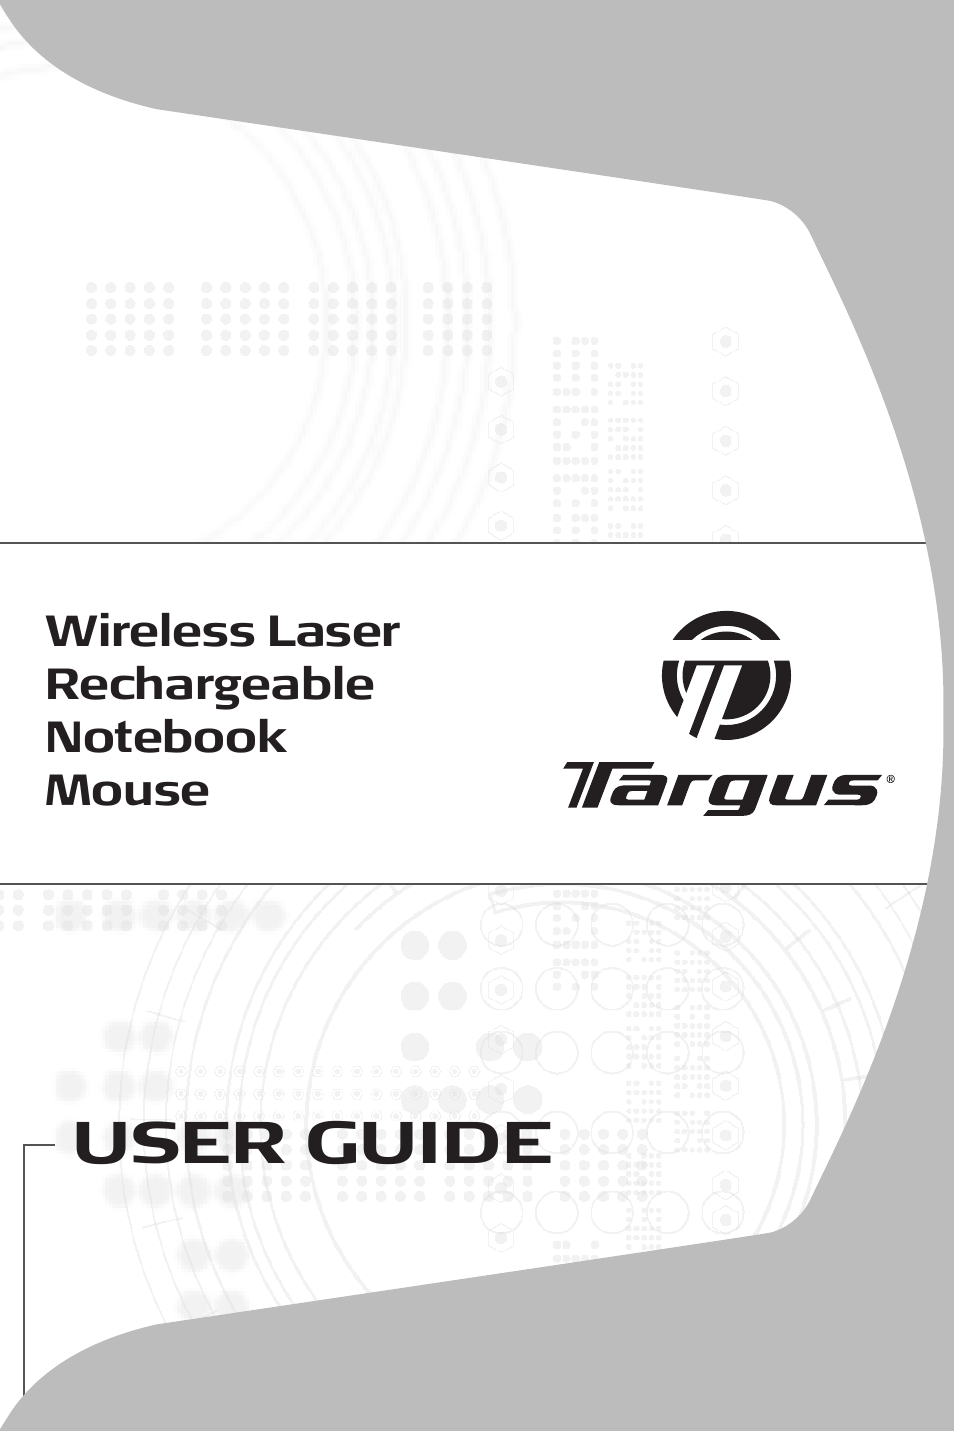 Wireless Laser Rechargable Notebook Mouse